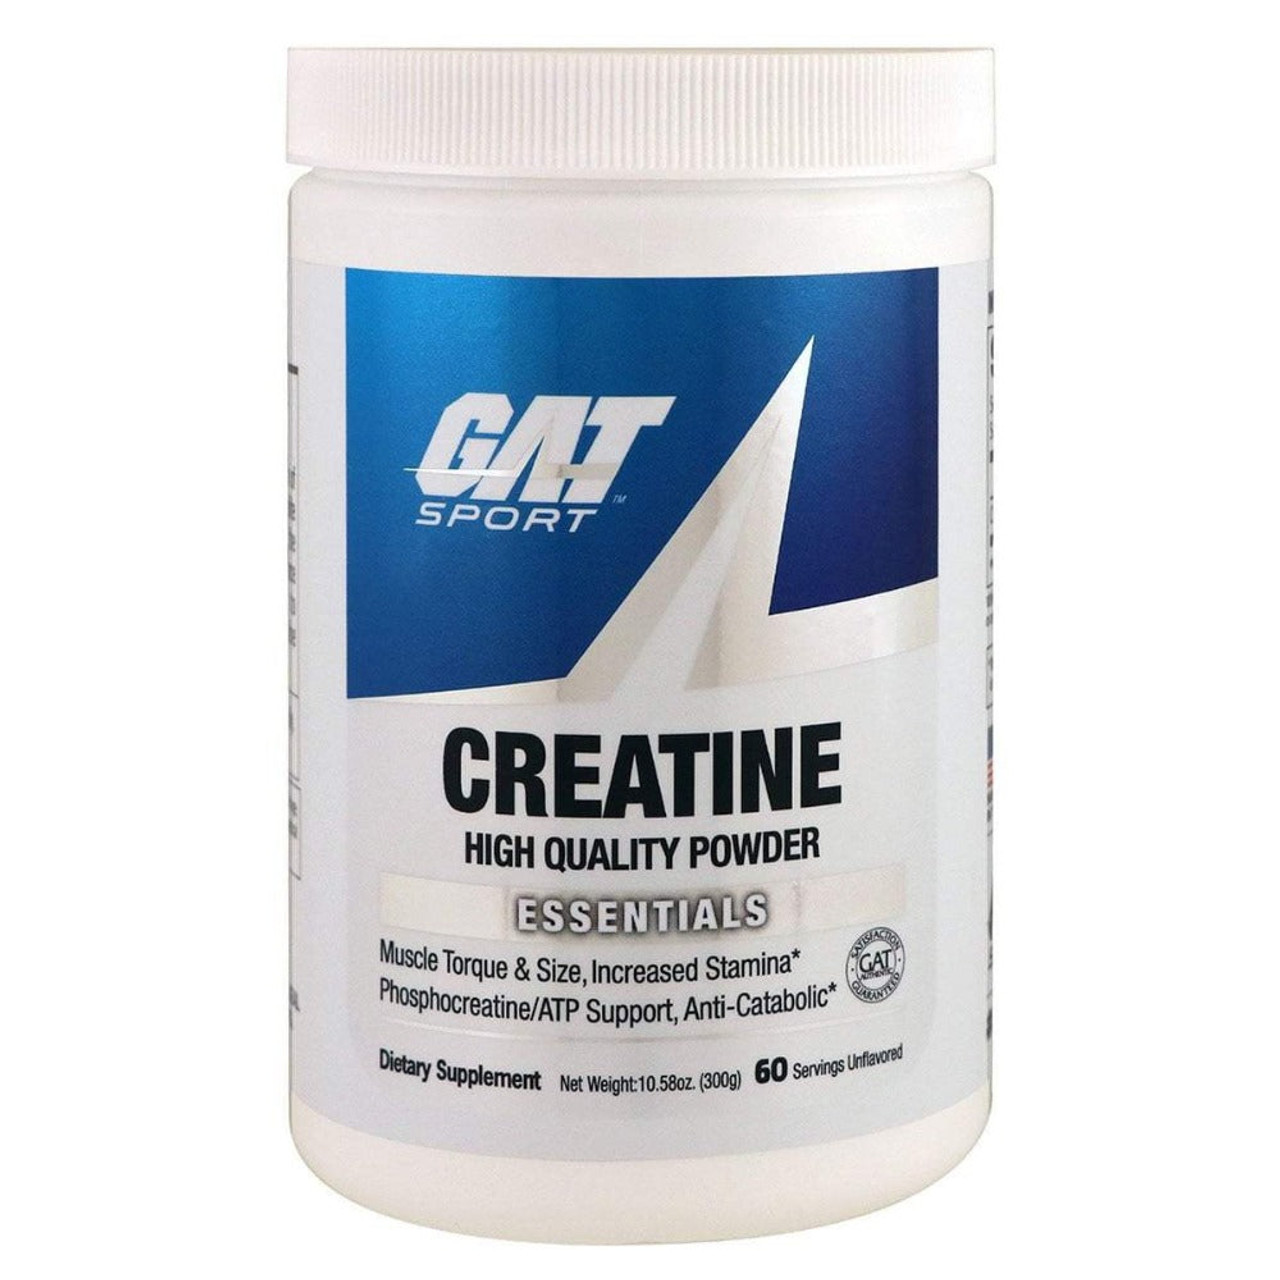 https://cdn11.bigcommerce.com/s-ilgxsy4t82/images/stencil/1280x1280/products/219998/558570/GAT-creatine_300g__60220.1686572551.jpg?c=1&imbypass=on